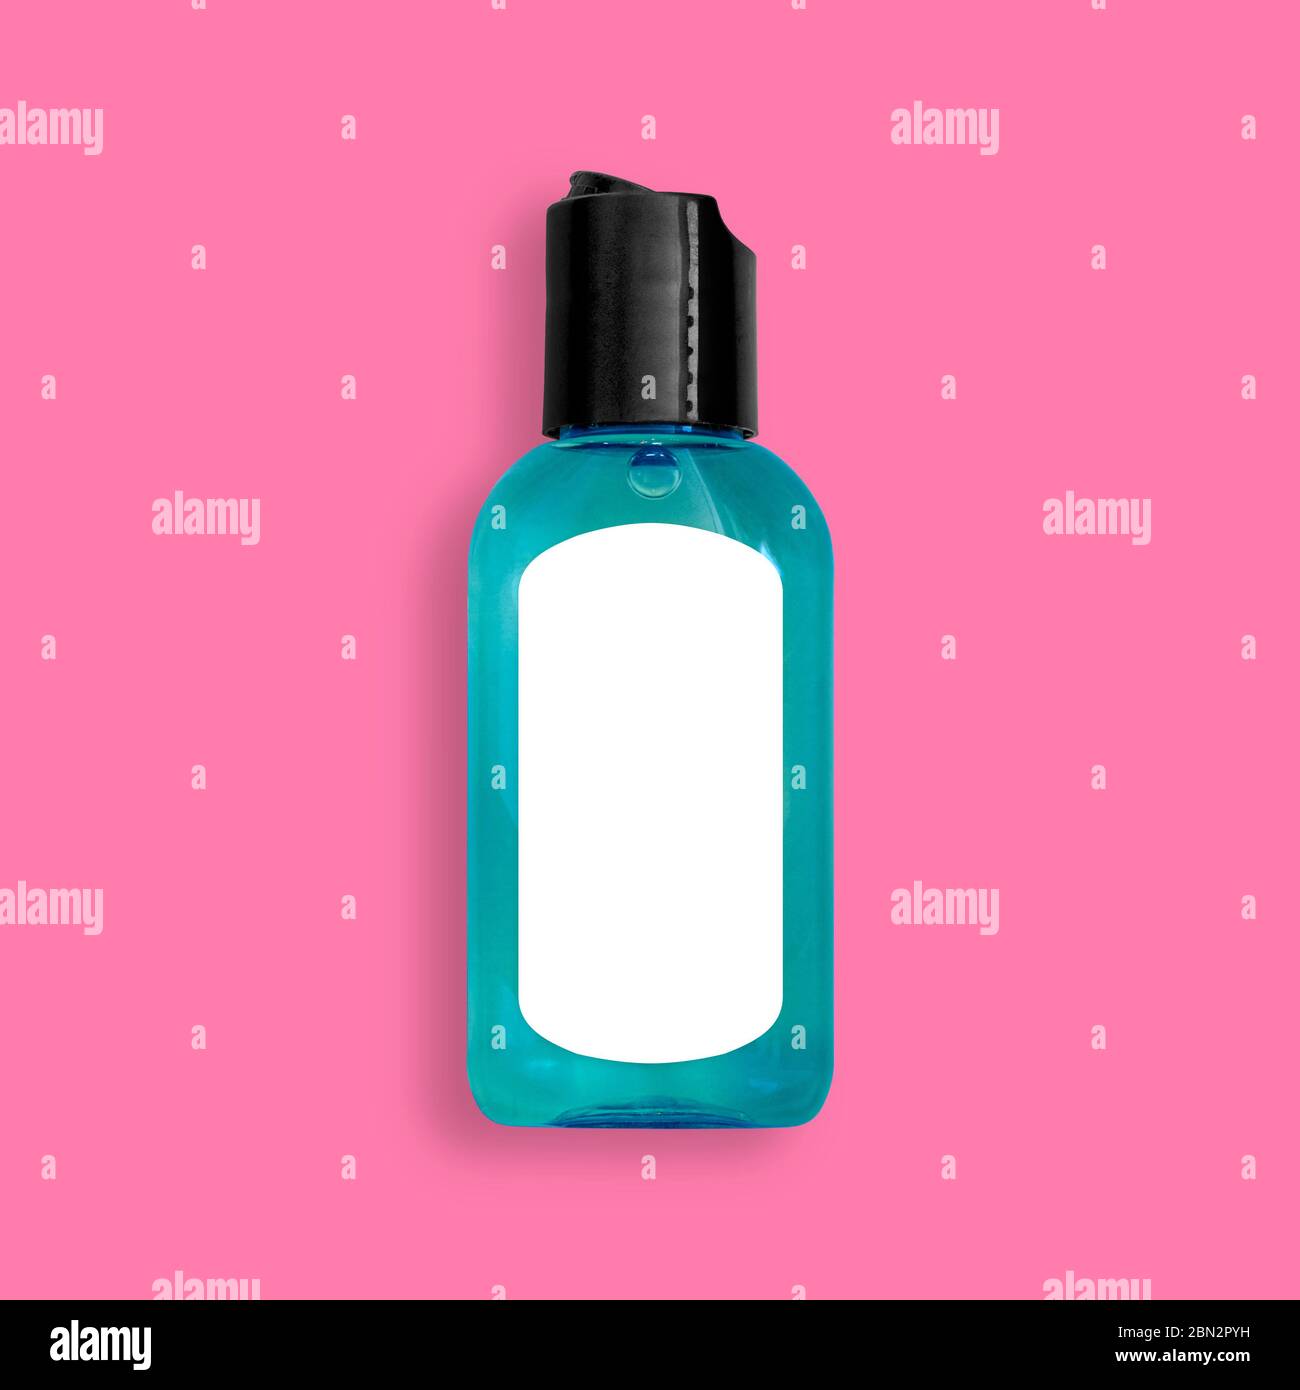 Hand sanitizer, liquid soap, washing gel, alcohol rub, squeeze bottle dispenser close up, isolated and presented in punchy pastel colors Stock Photo